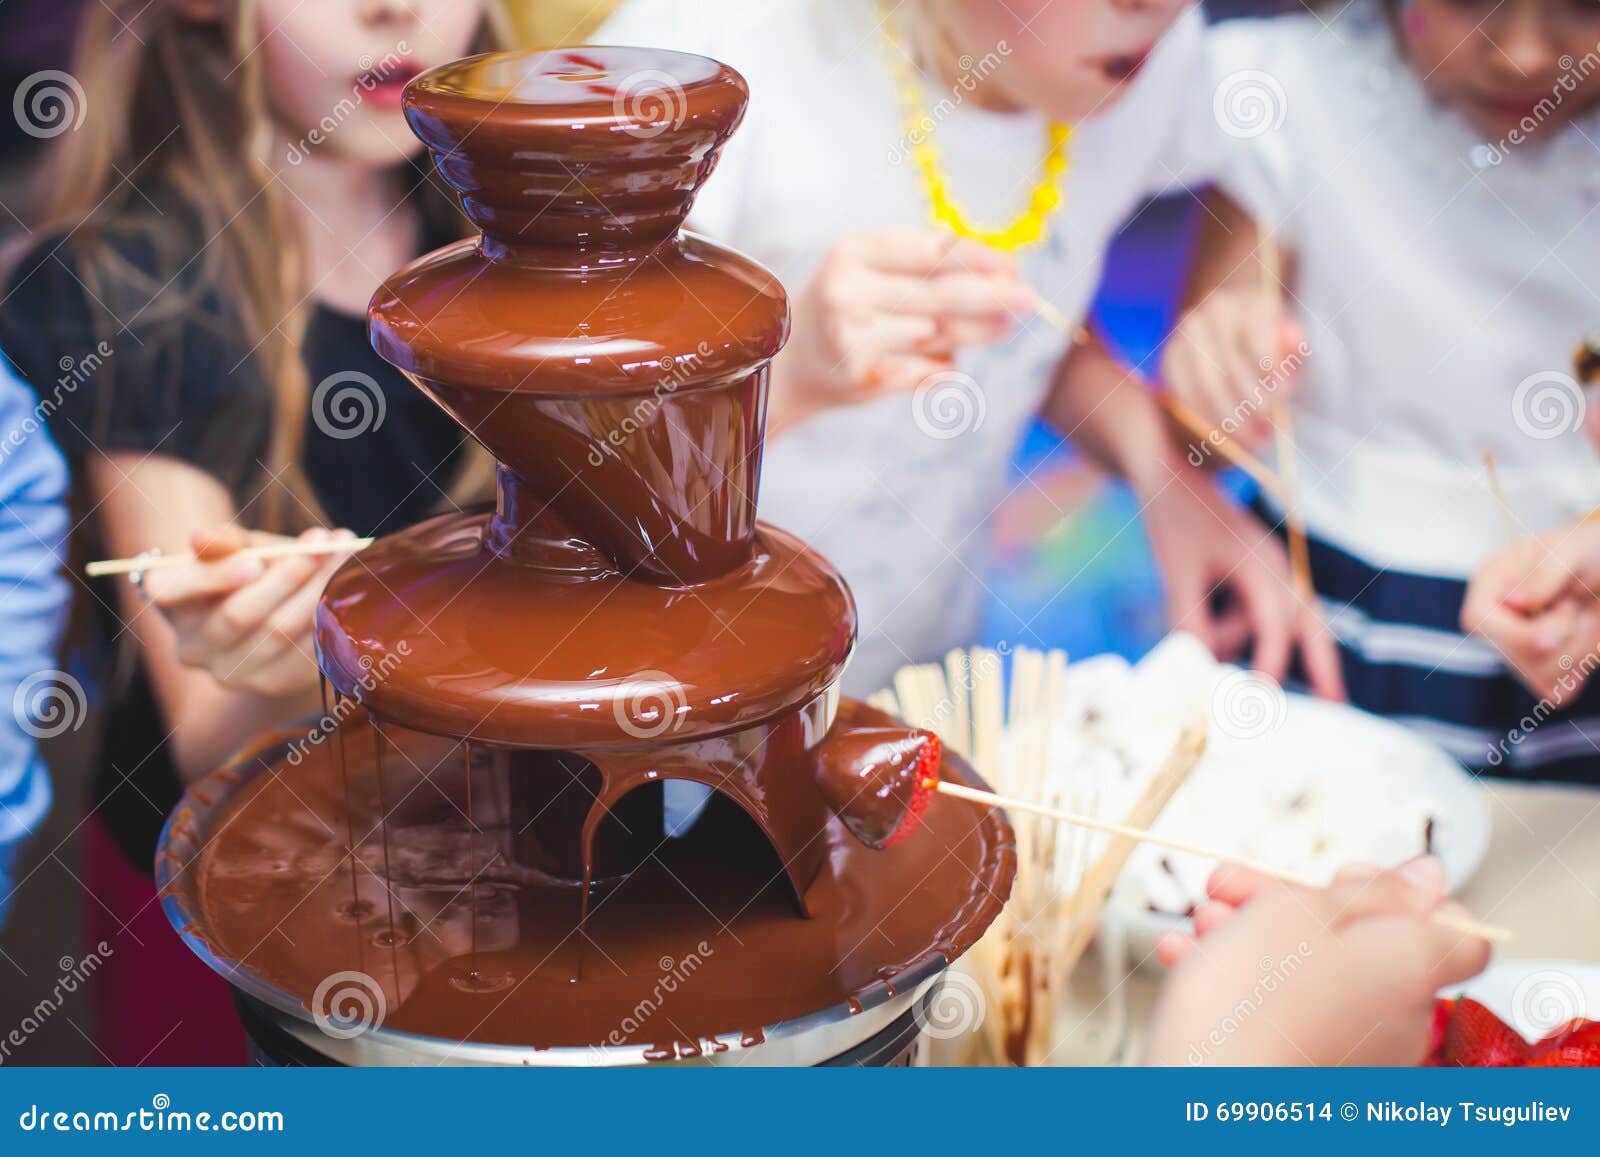 vibrant picture of chocolate fountain fontain on childen kids birthday party with a kids playing around and marshmallows and fruit